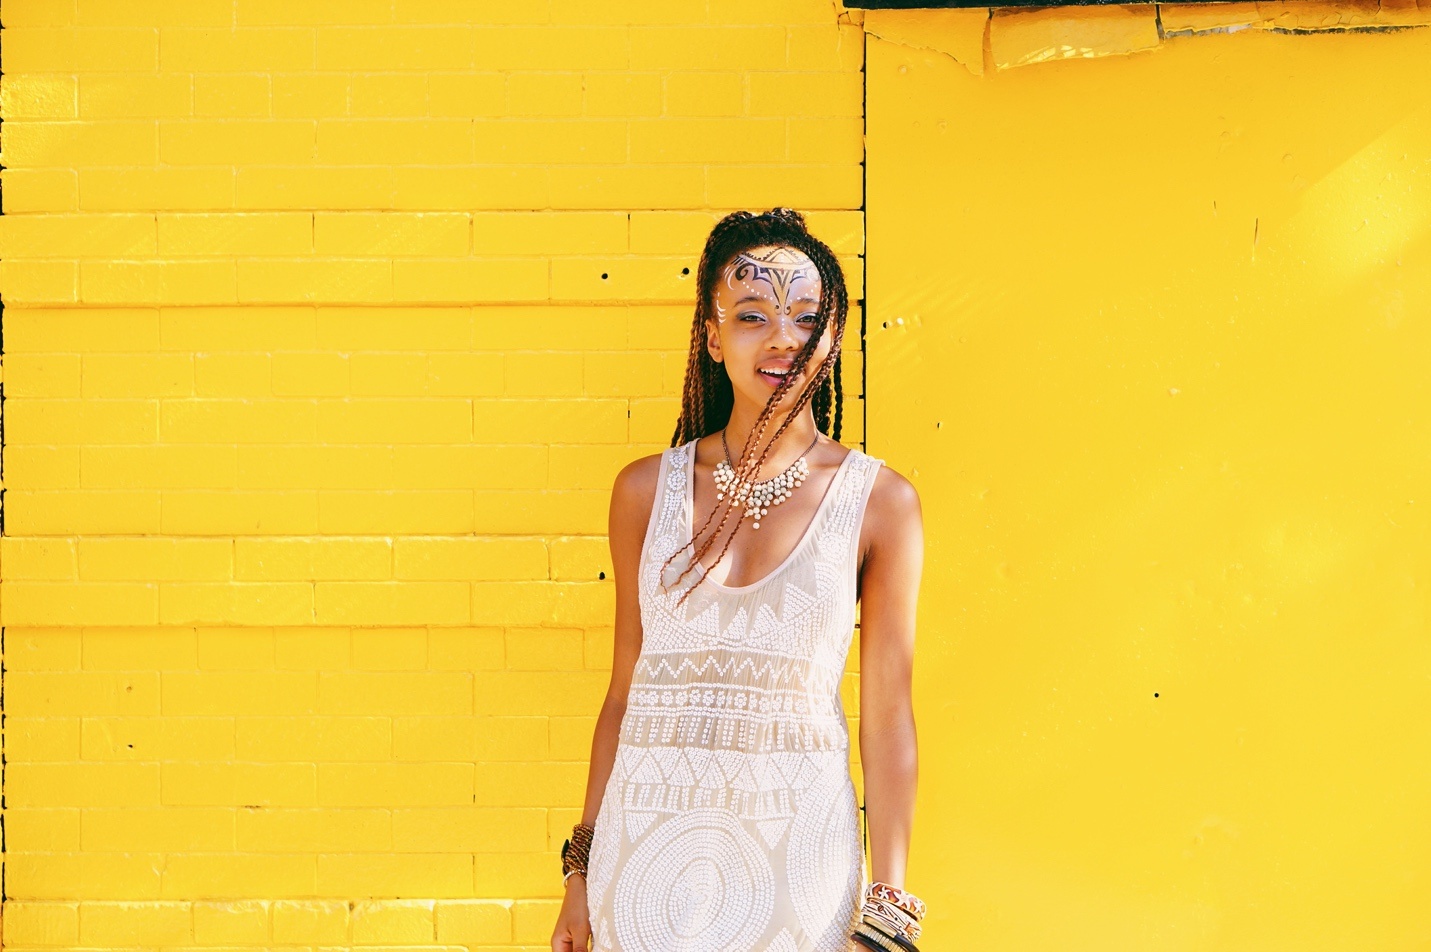 A photo of the artist Emily Waters standing against a bright yellow wall. They wear a white dress with arms at their sides as their braided hair fall across their smiling face.